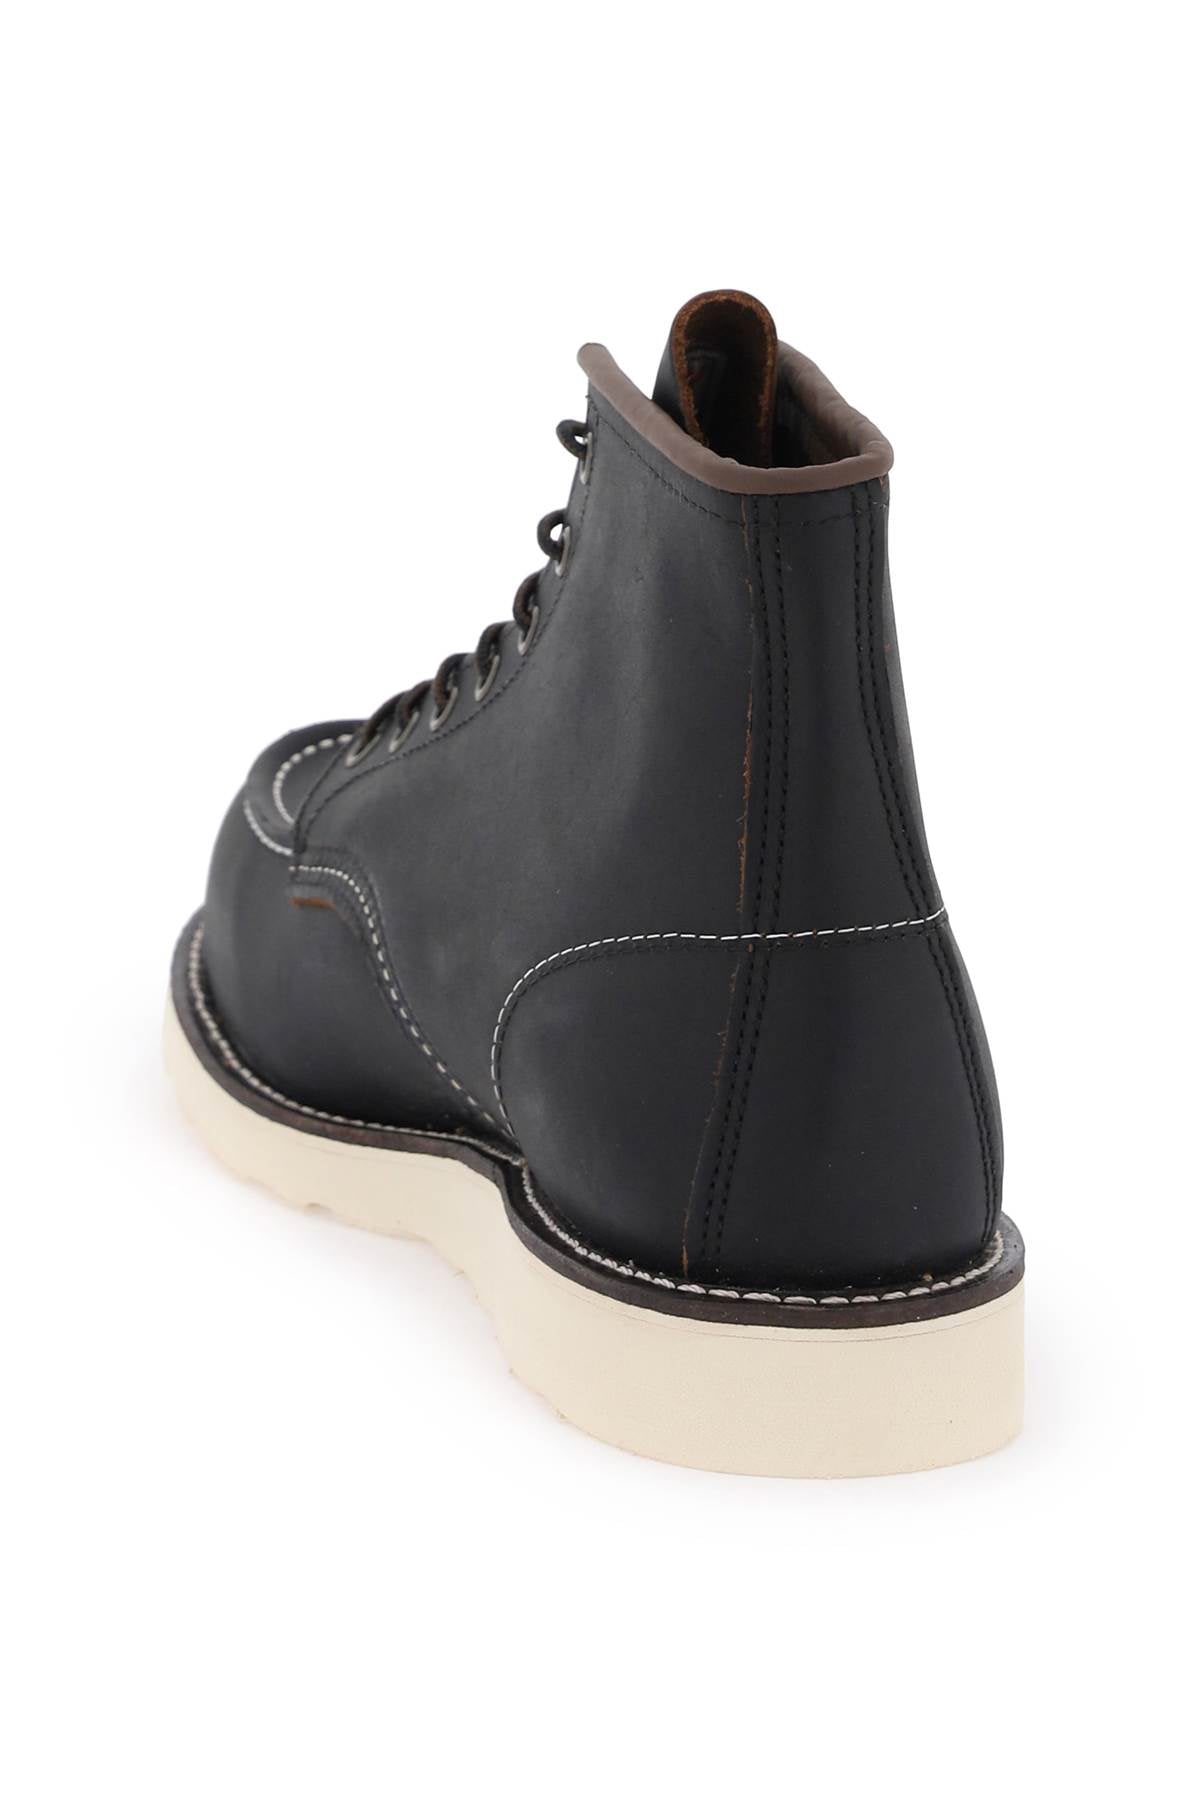 Red Wing Shoes Classic Moc Ankle Boots   Black